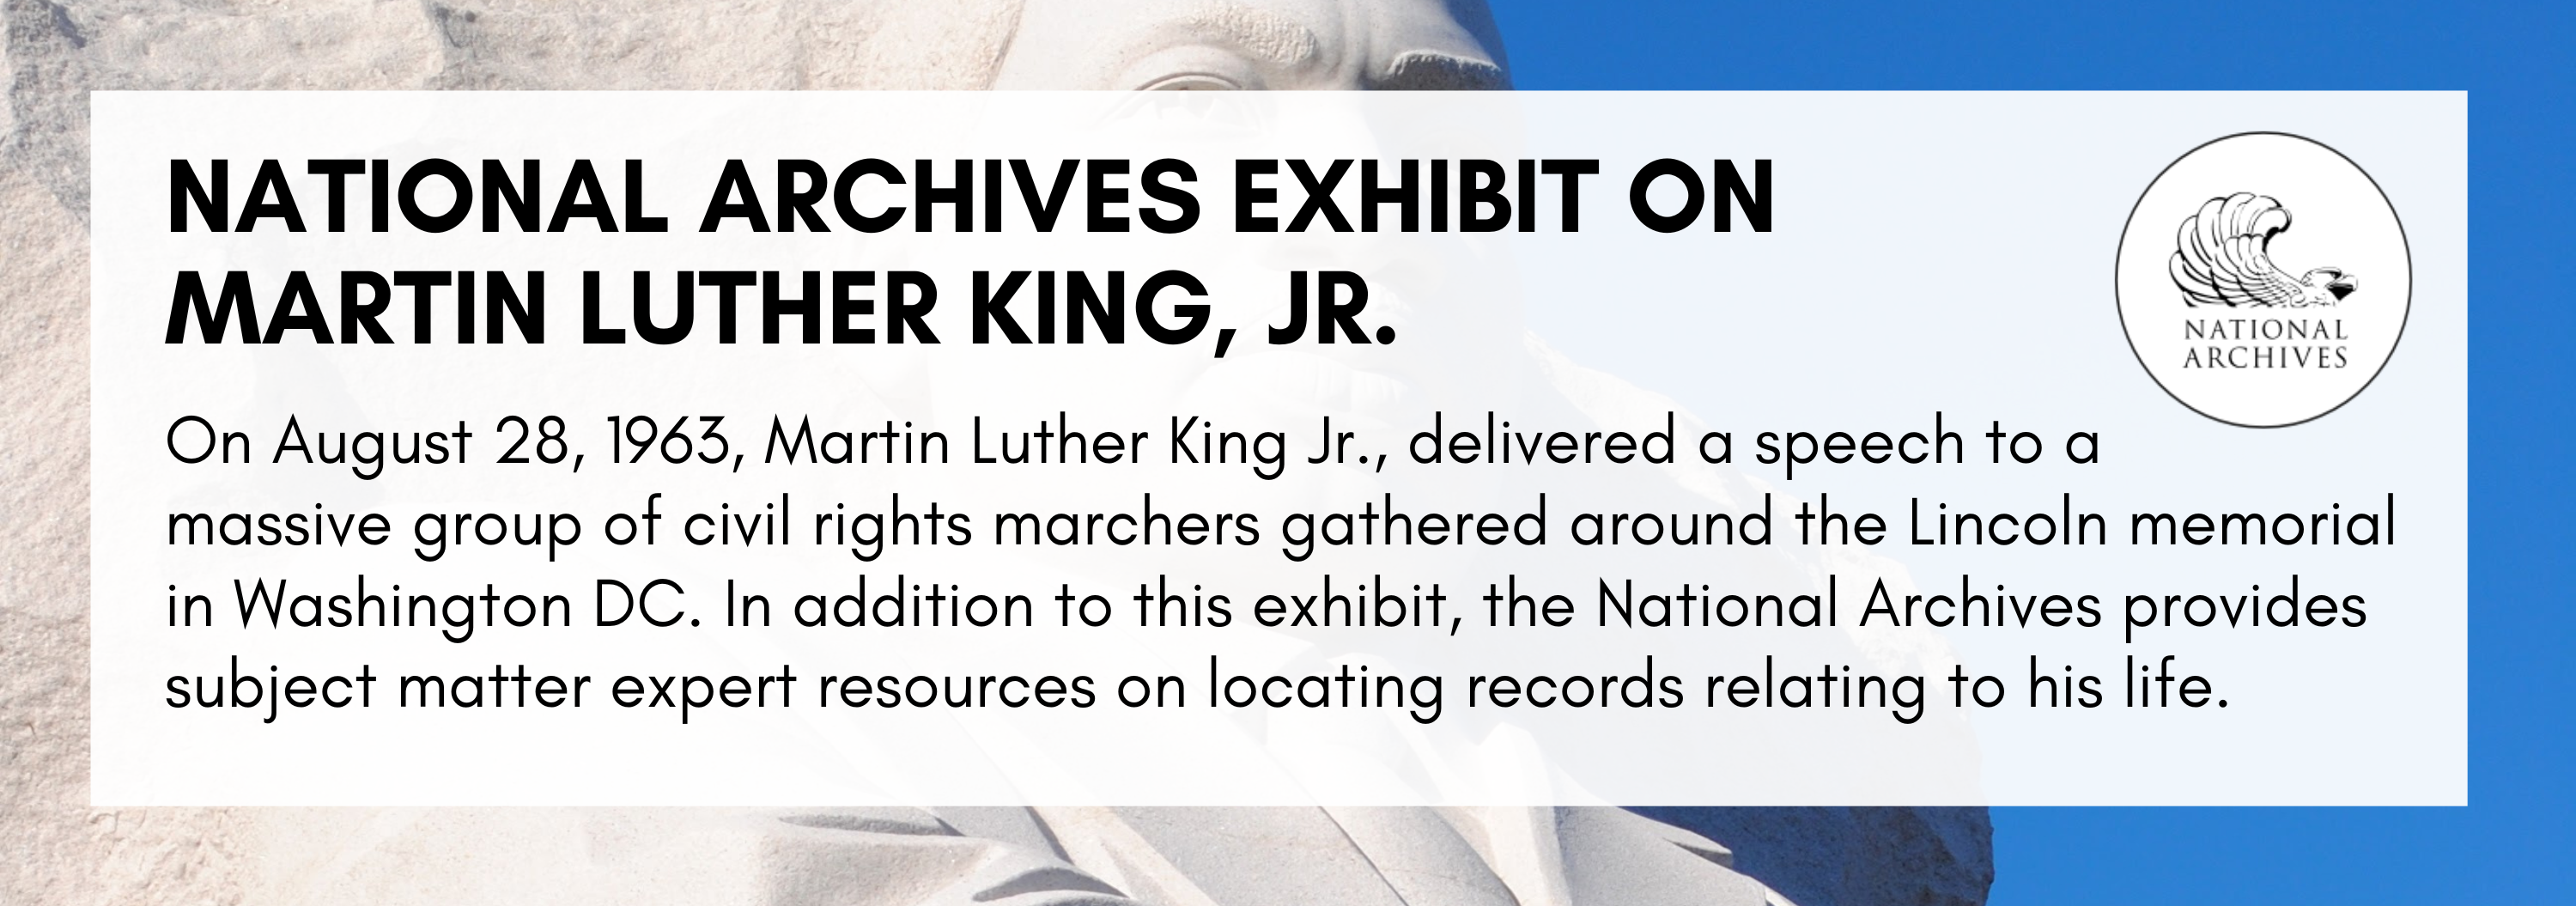 National Archives Exhibit on Martin Luther King, Jr.